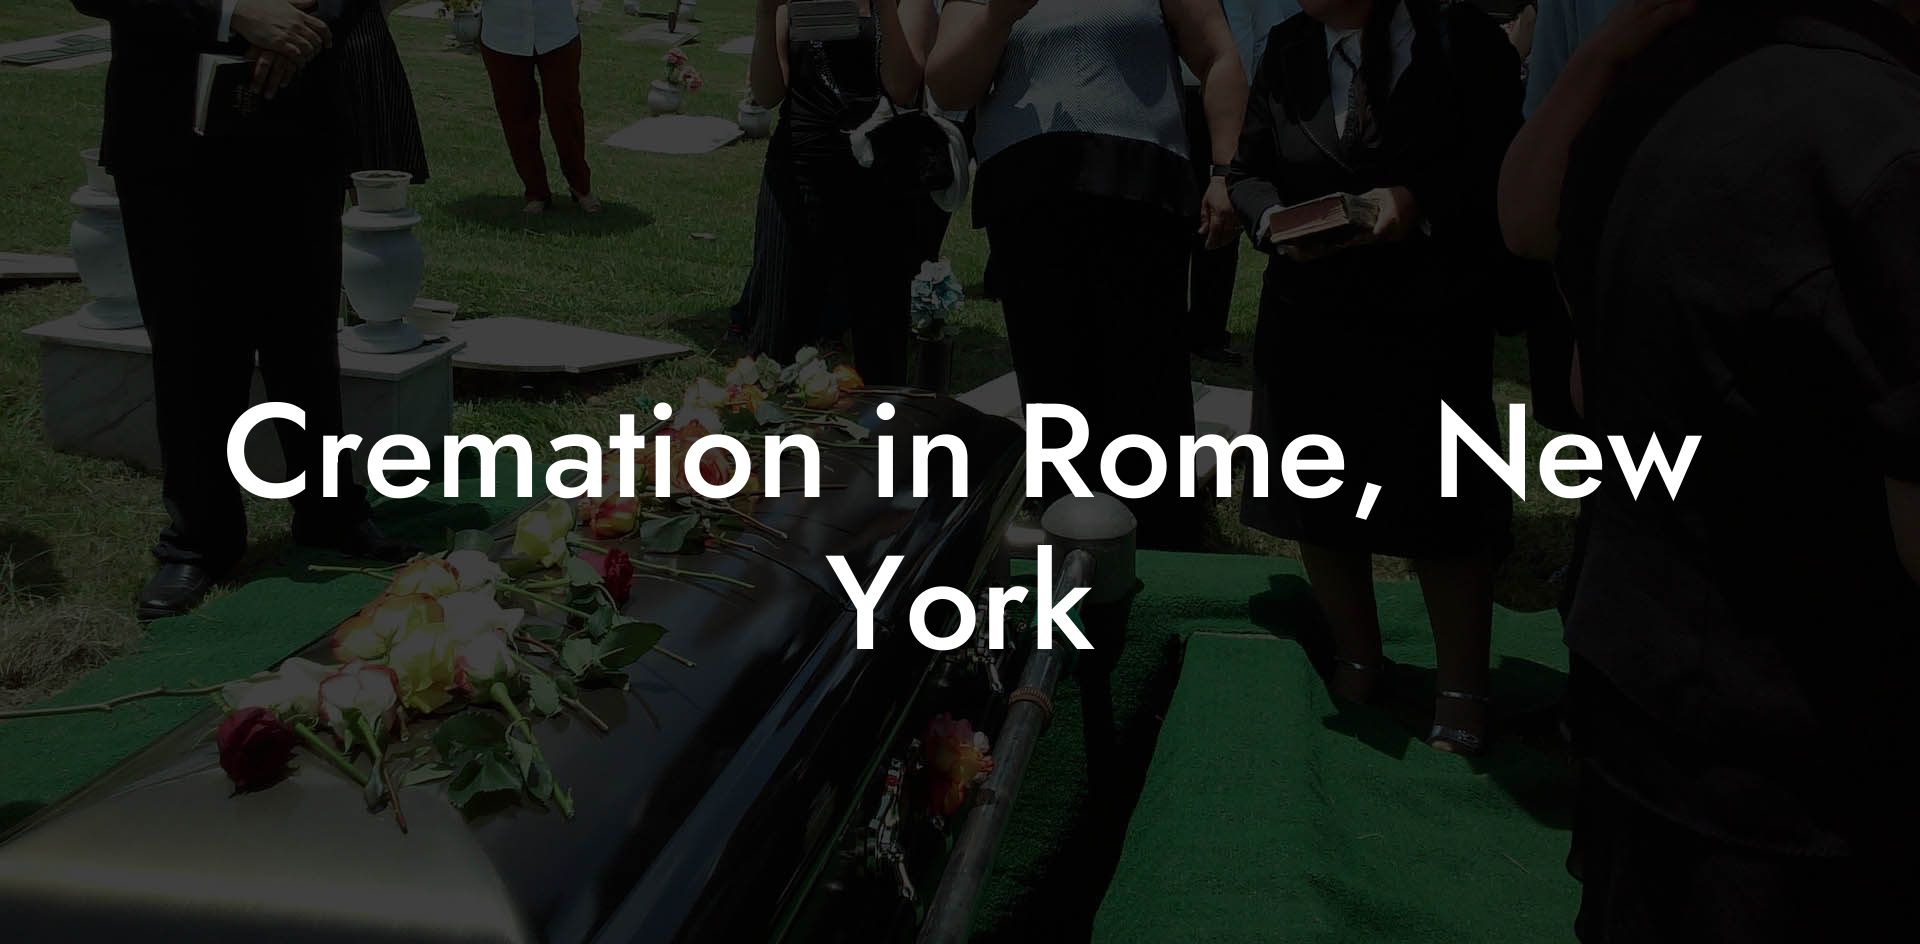 Cremation in Rome, New York